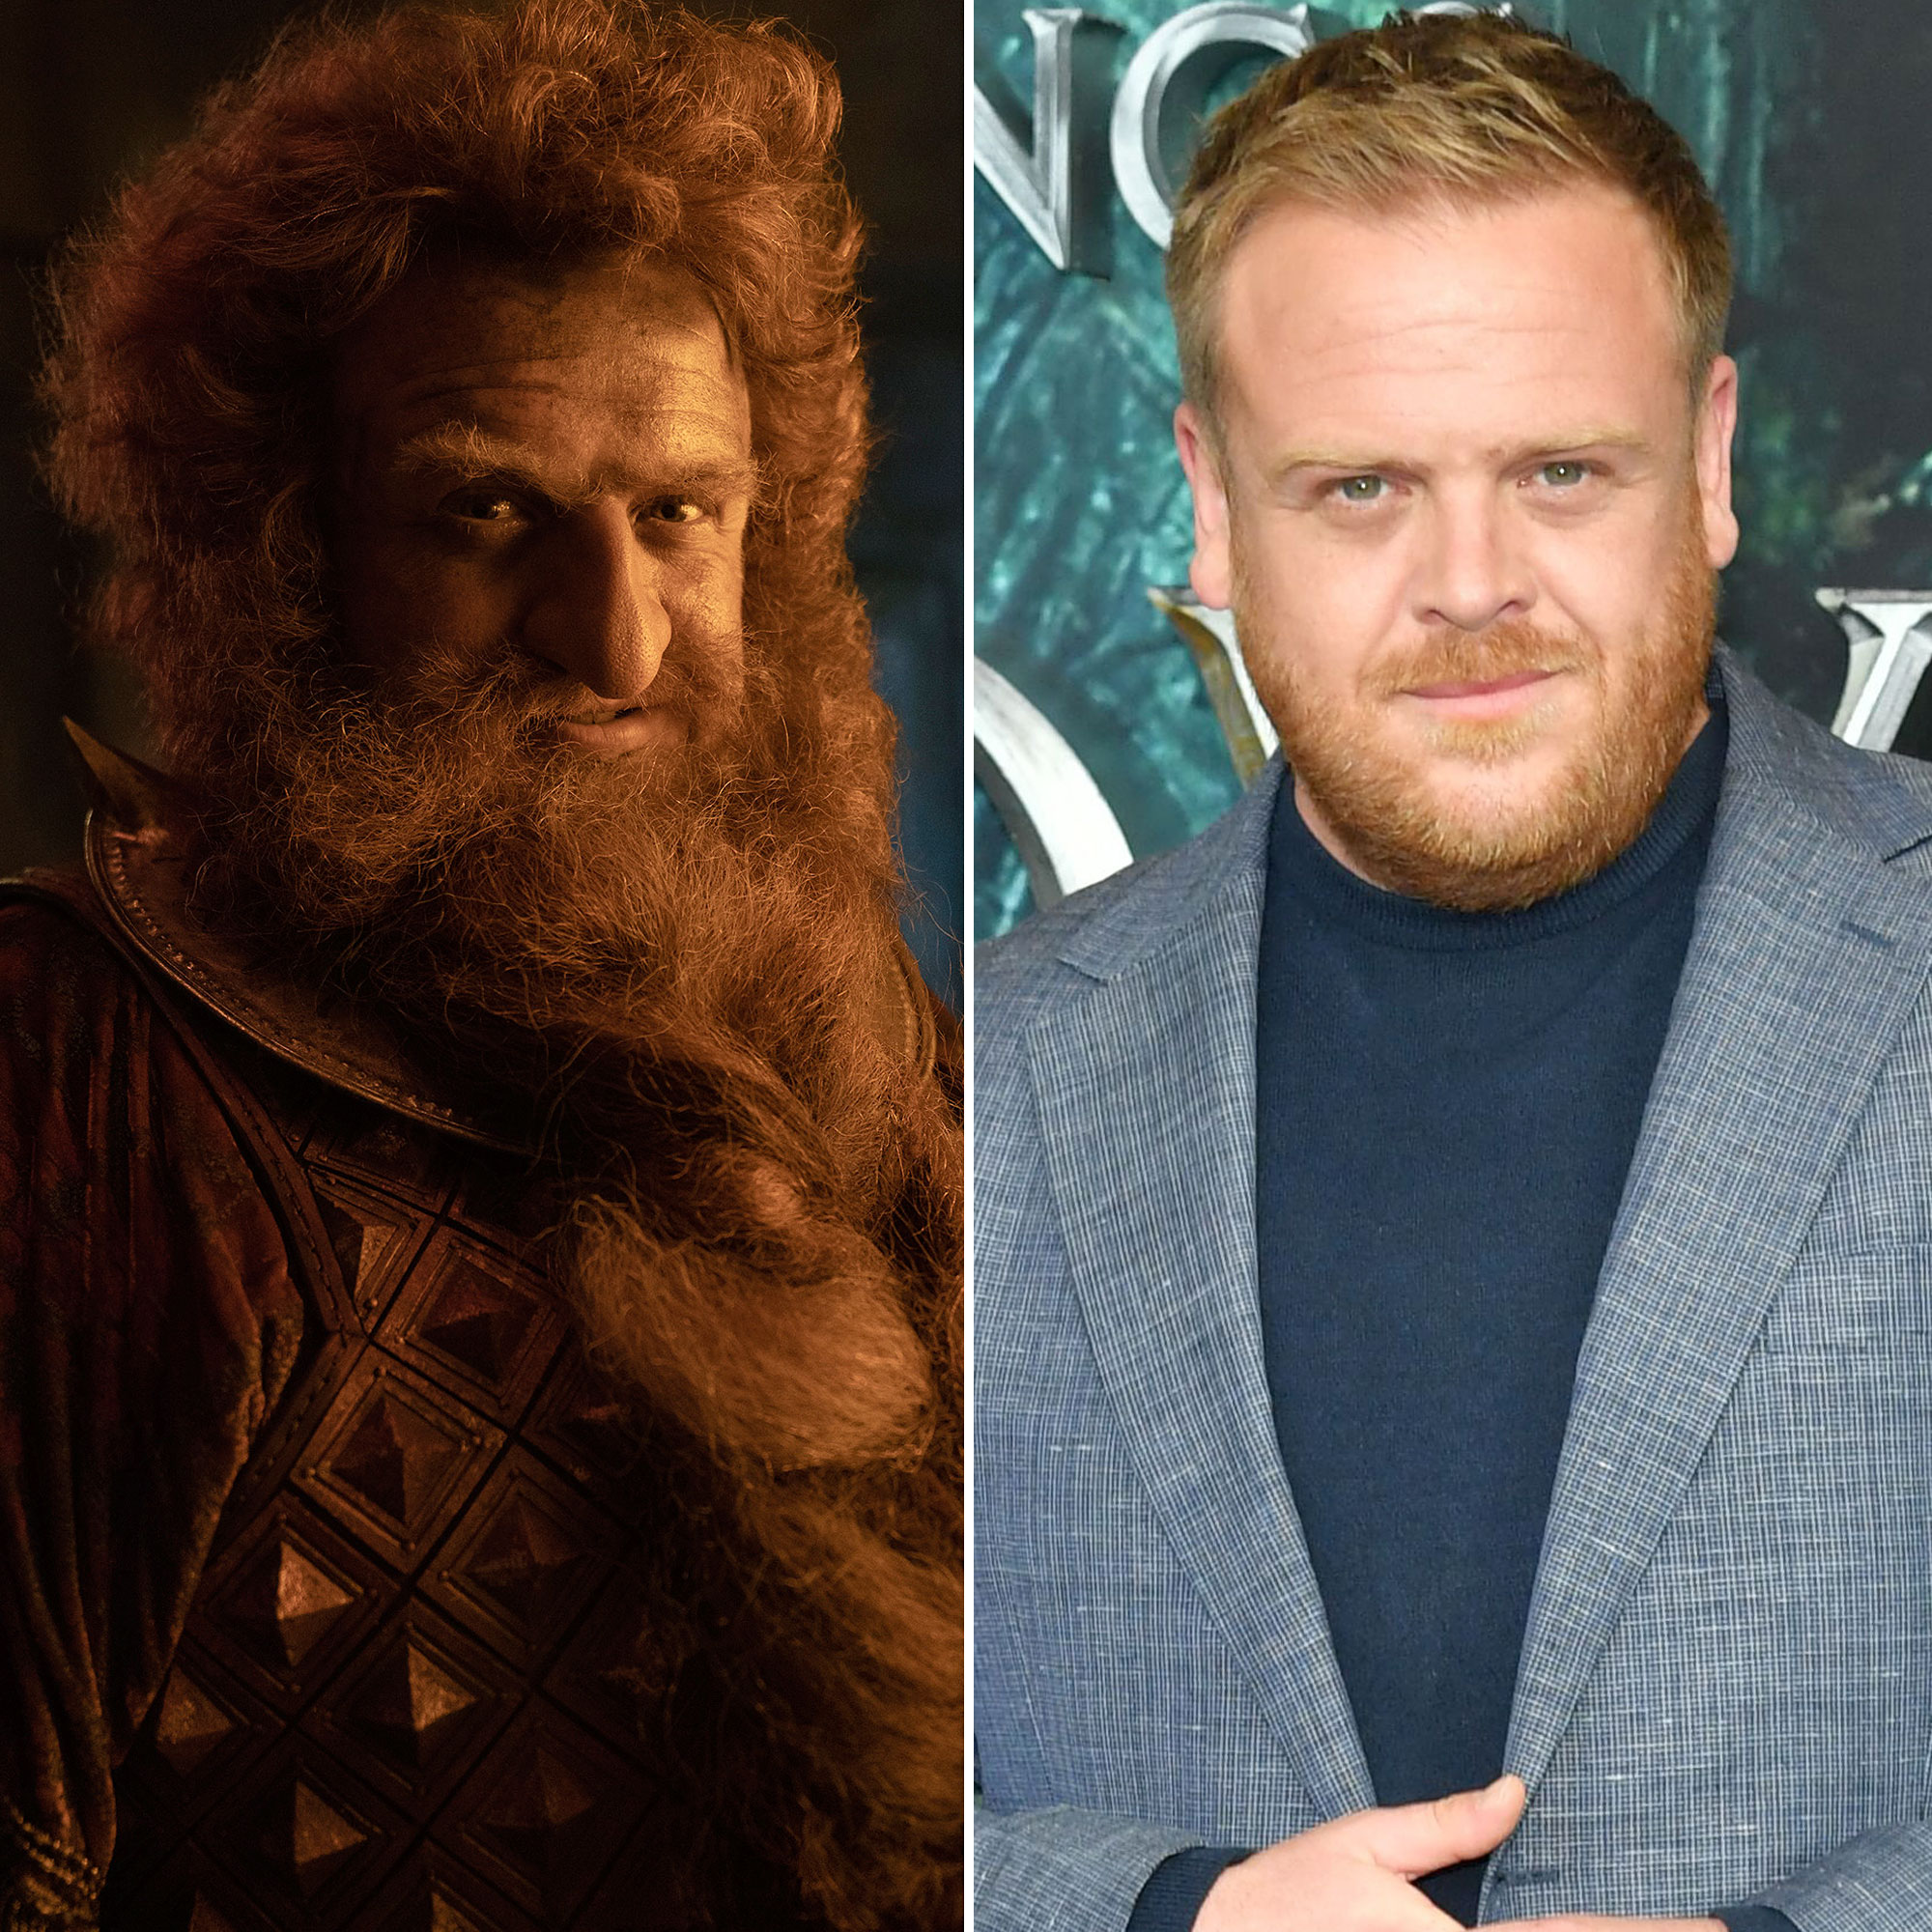 What The Lord Of The Rings: The Rings Of Power Cast Should Really Look Like